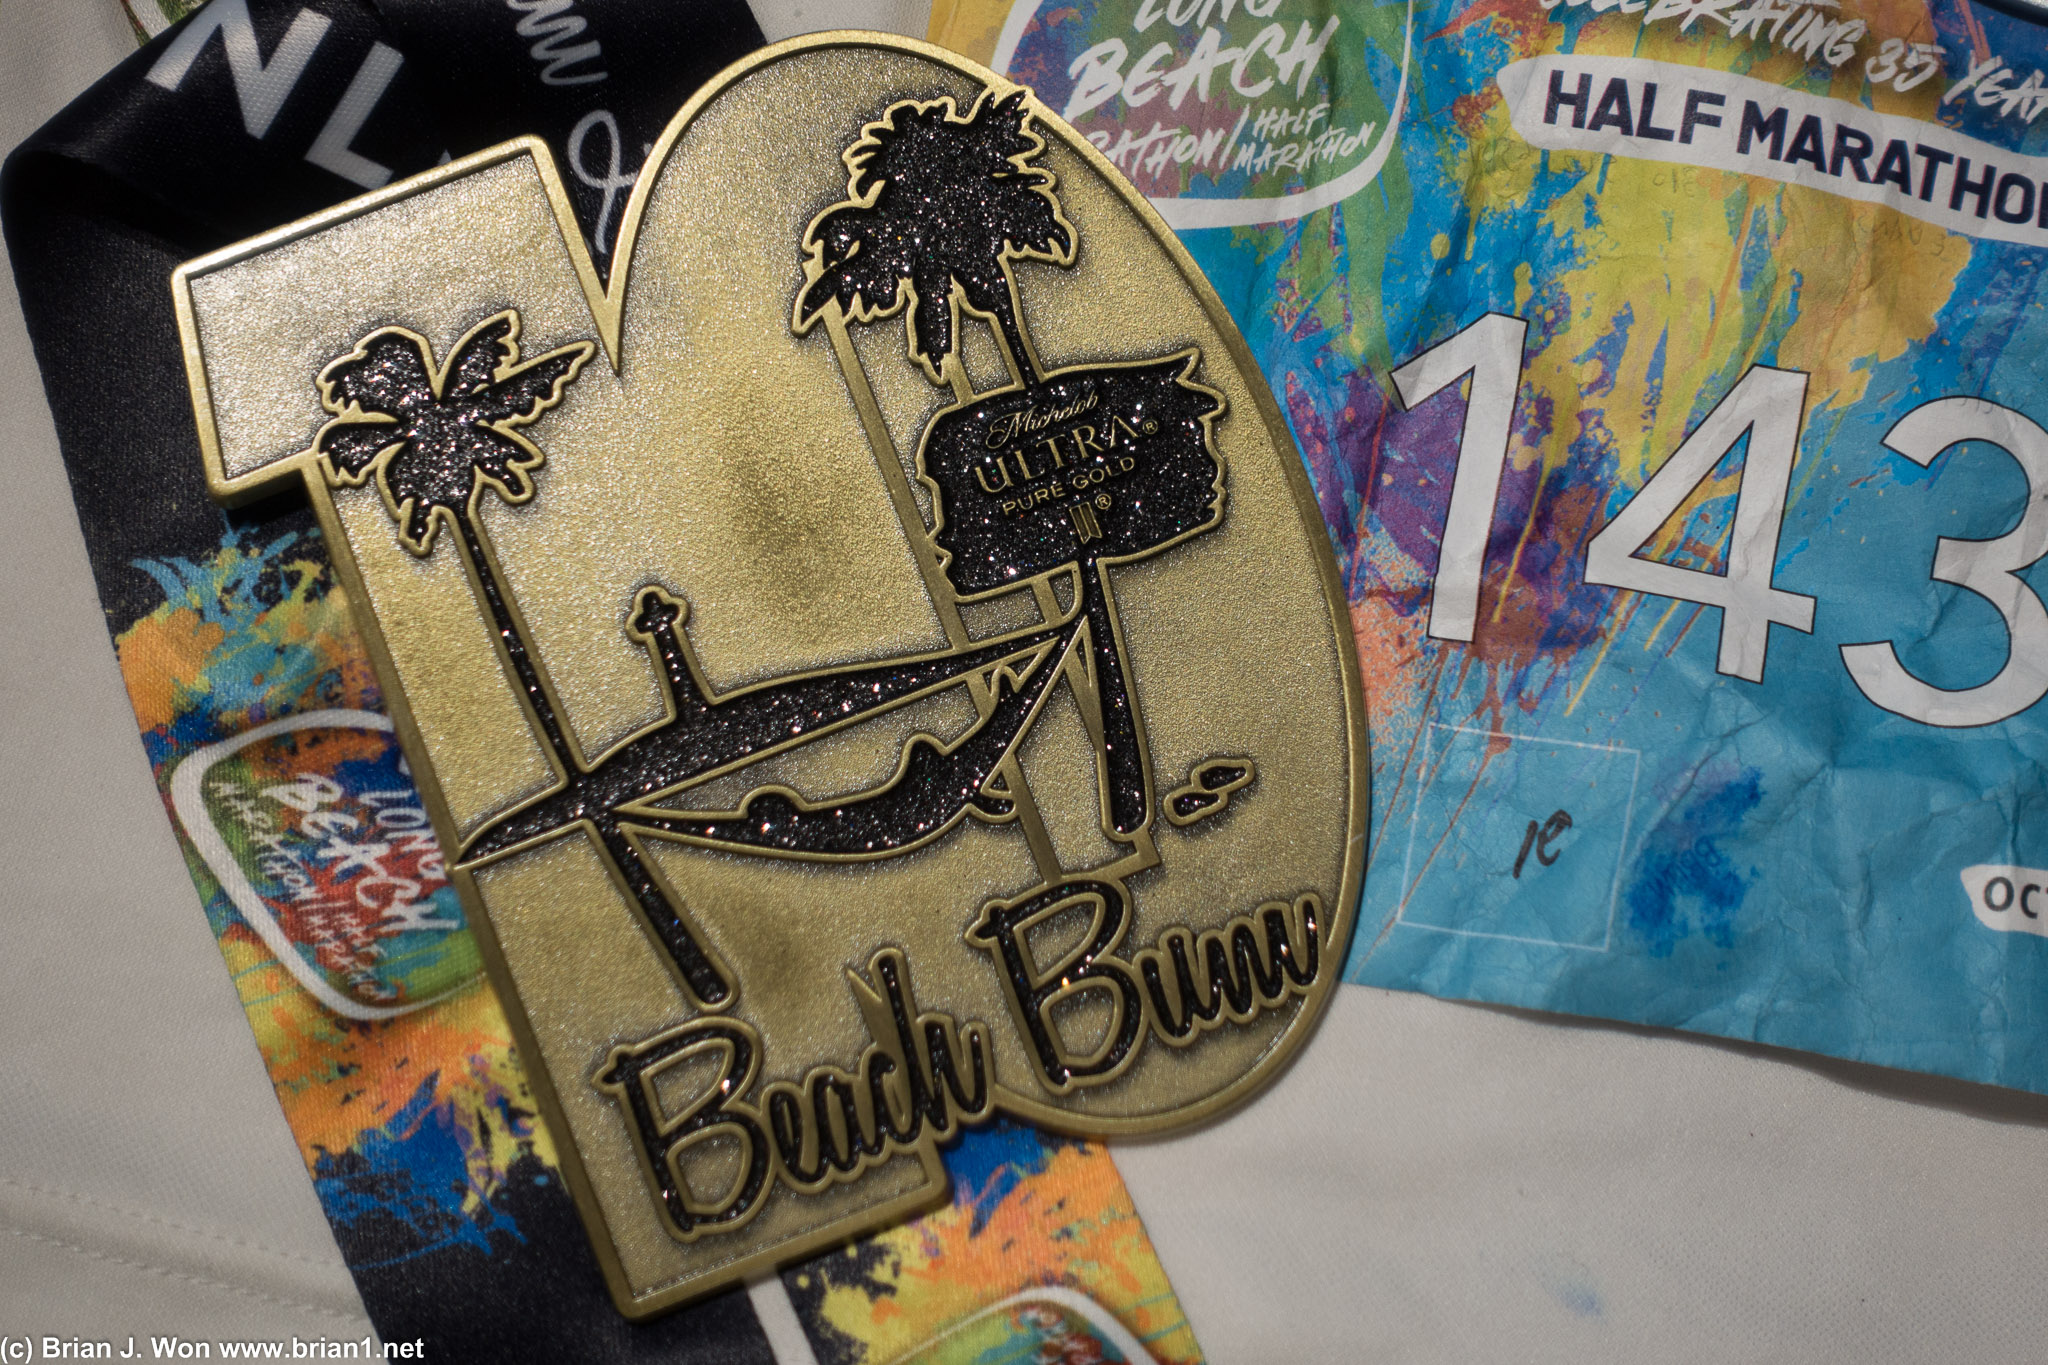 And one more shot of the ridiculous 10 year Beach Bum medal.